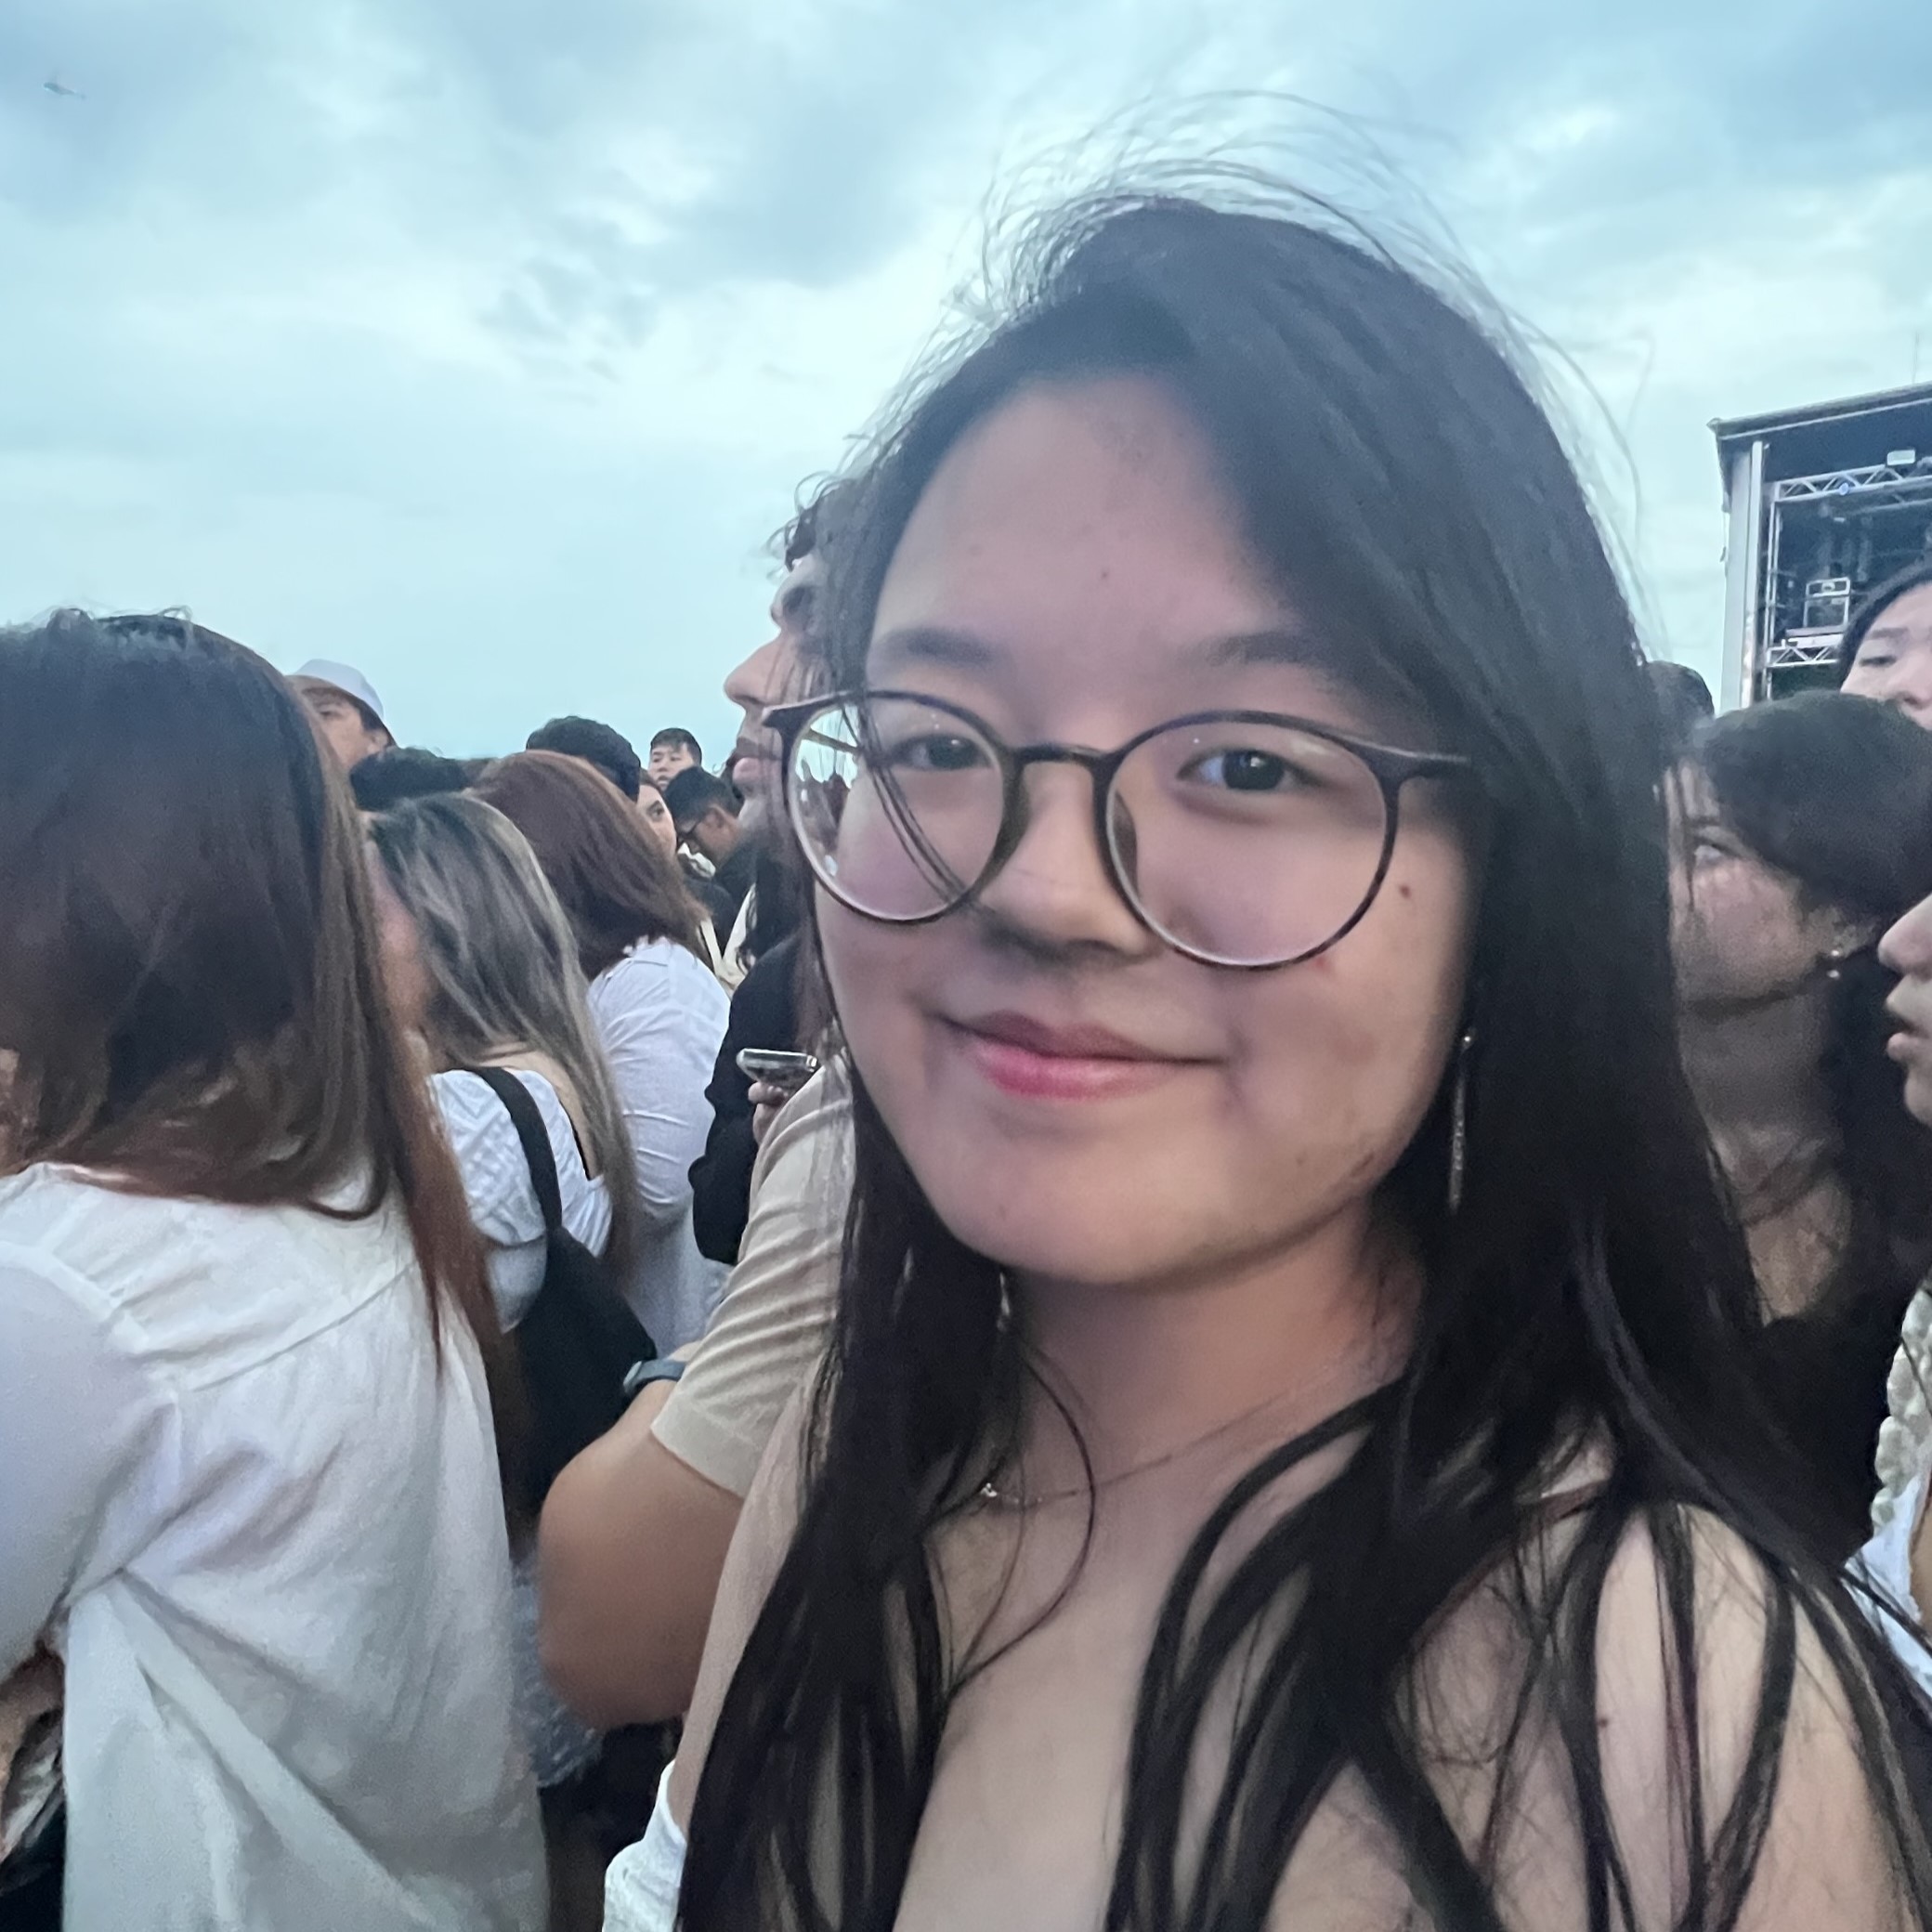 Lily is a sophomore majoring in Biological Sciences and pursing the Segal Design Certificate. She is interested in exploring how design and engineering can be leveraged to promote sustainability.LINKEDINLINKhttps://www.linkedin.com/in/lily-li2004/